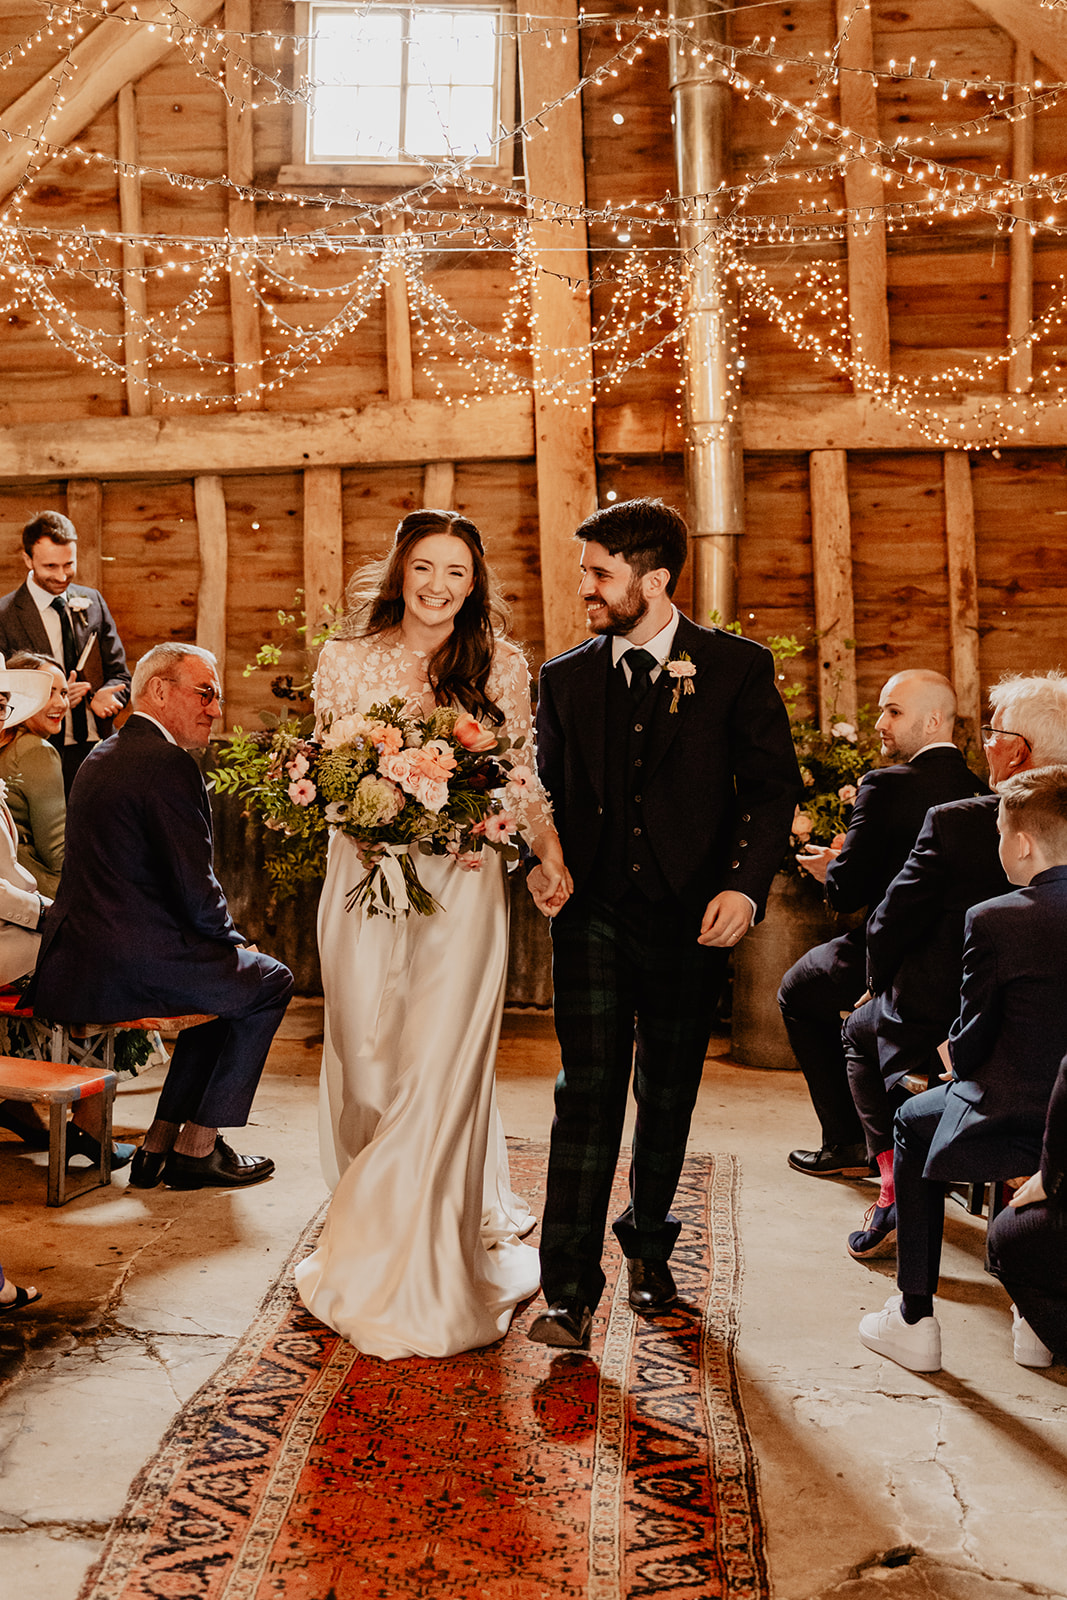 Bride and Groom ceremony at a Secret Barn Wedding, West Sussex. By Olive Joy Photography